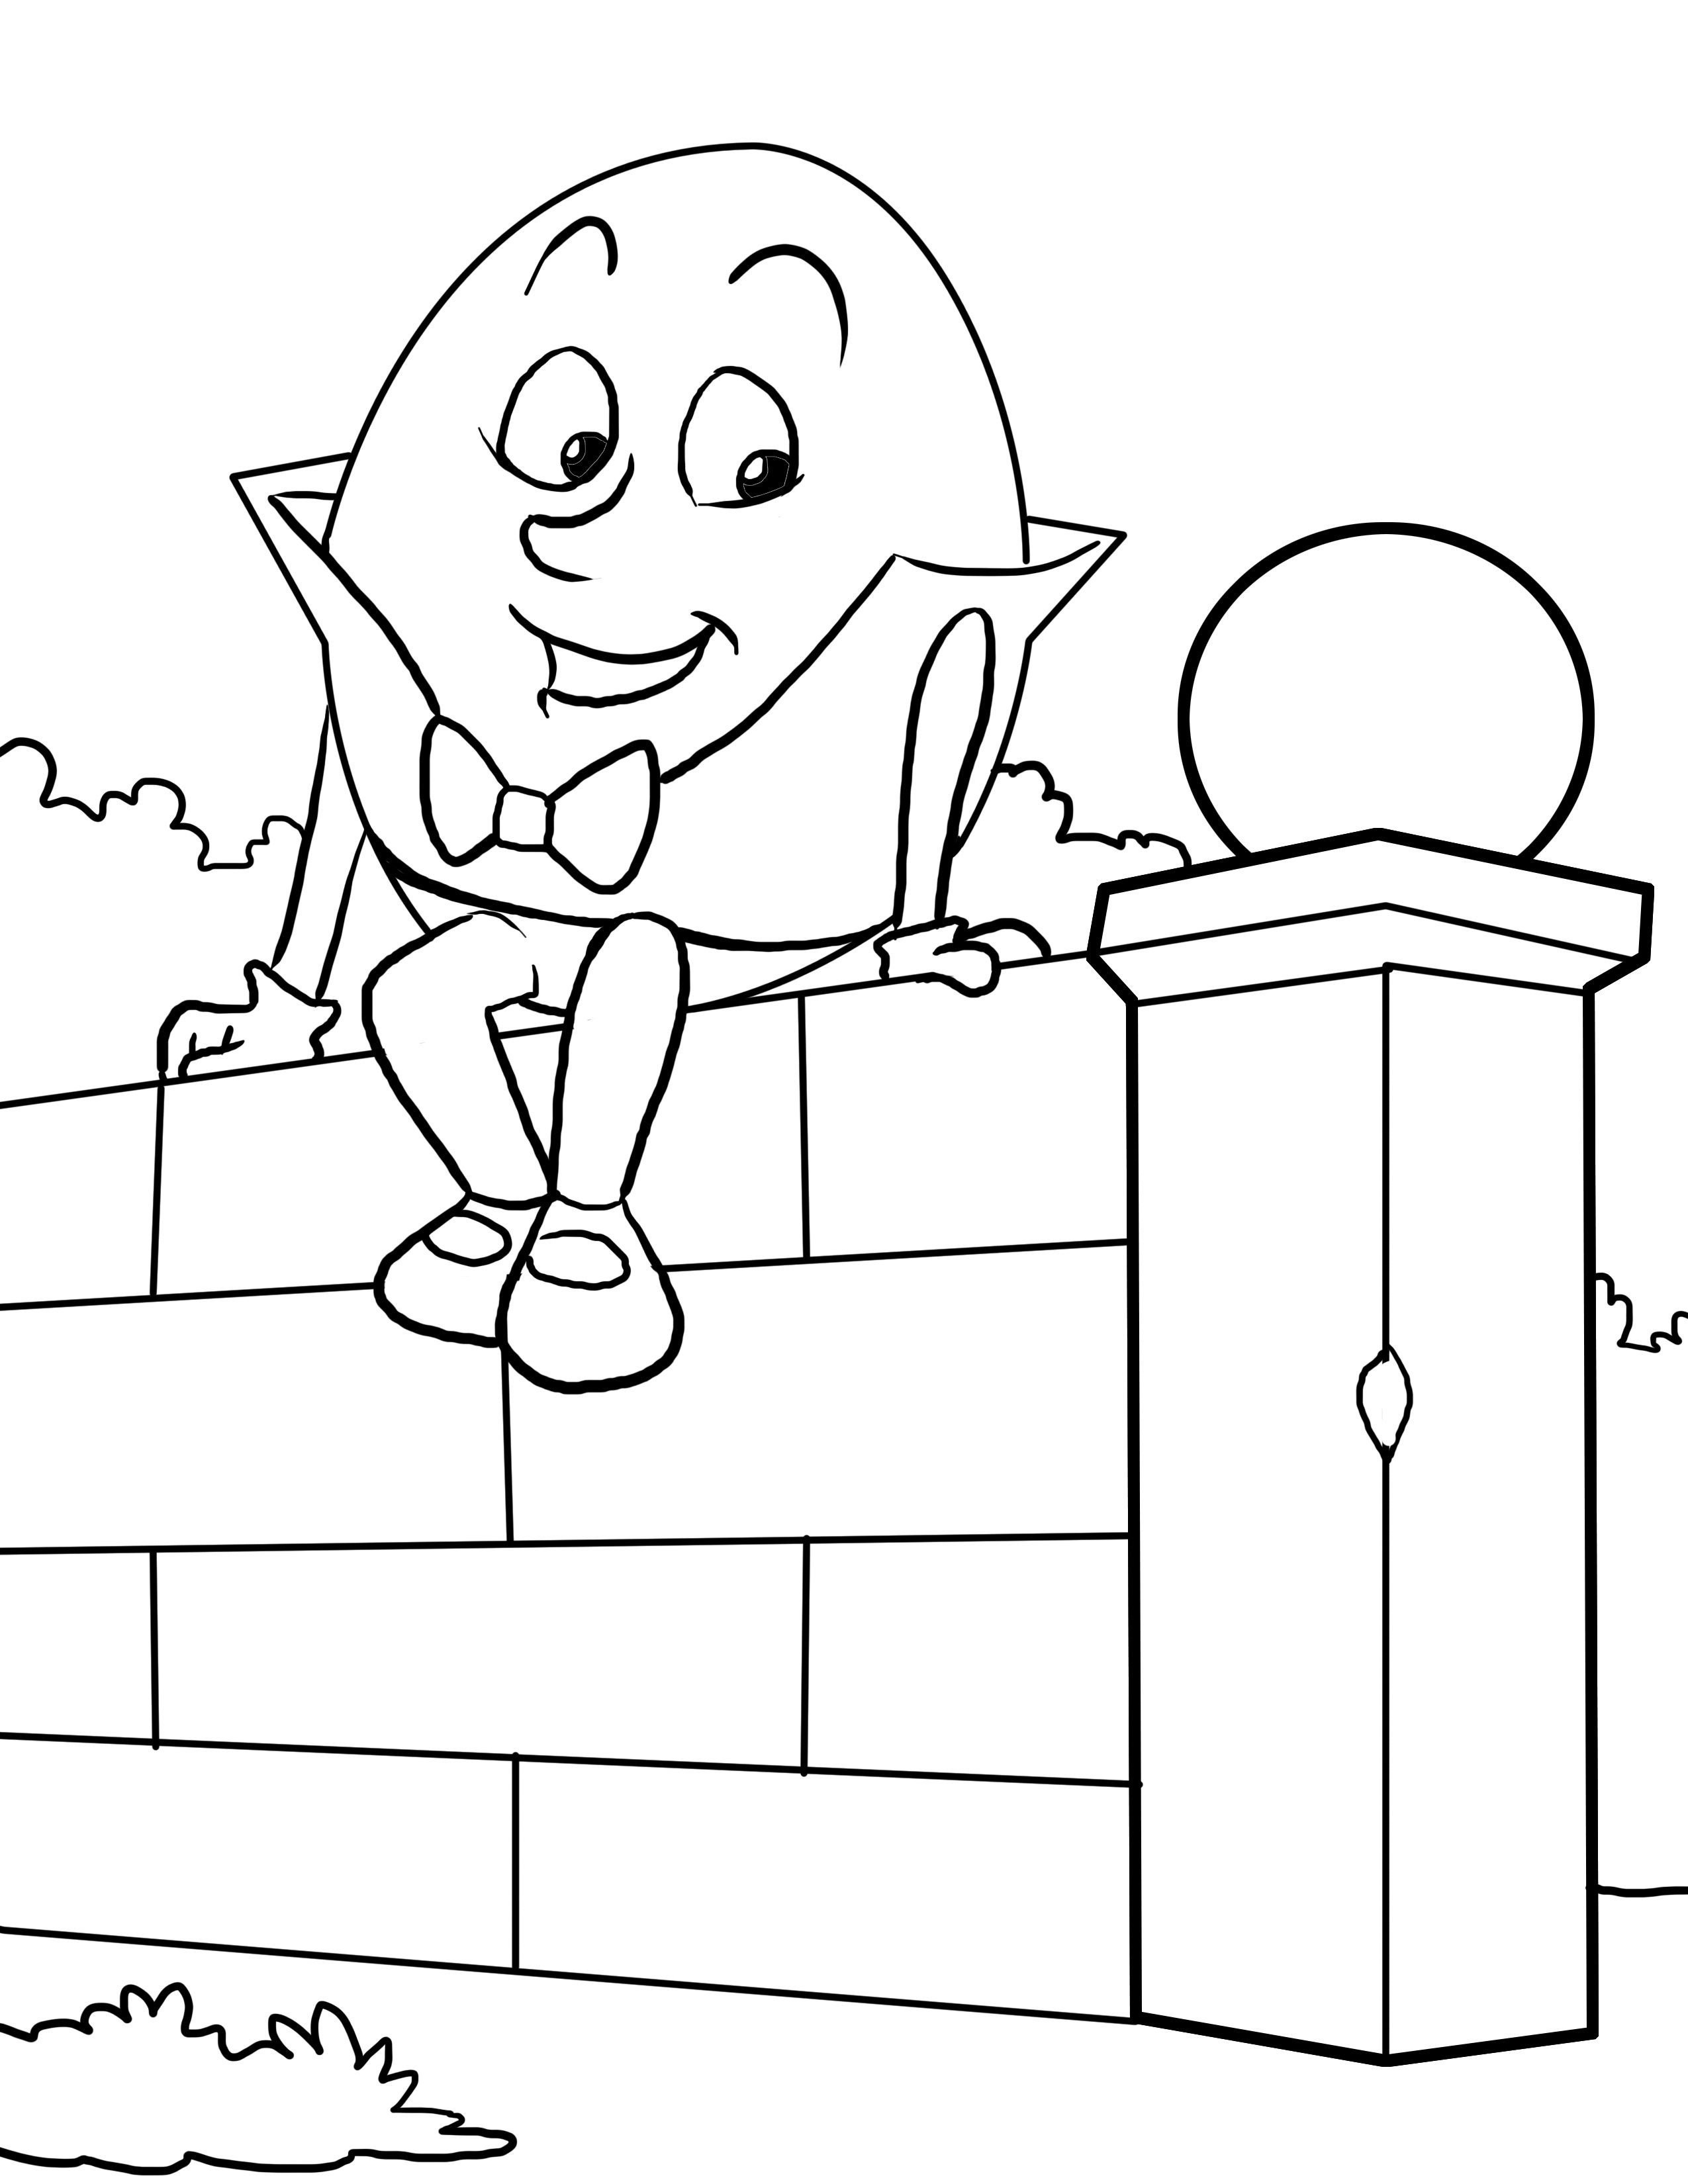 Humpty dumpty clipart colouring page, Humpty dumpty colouring page